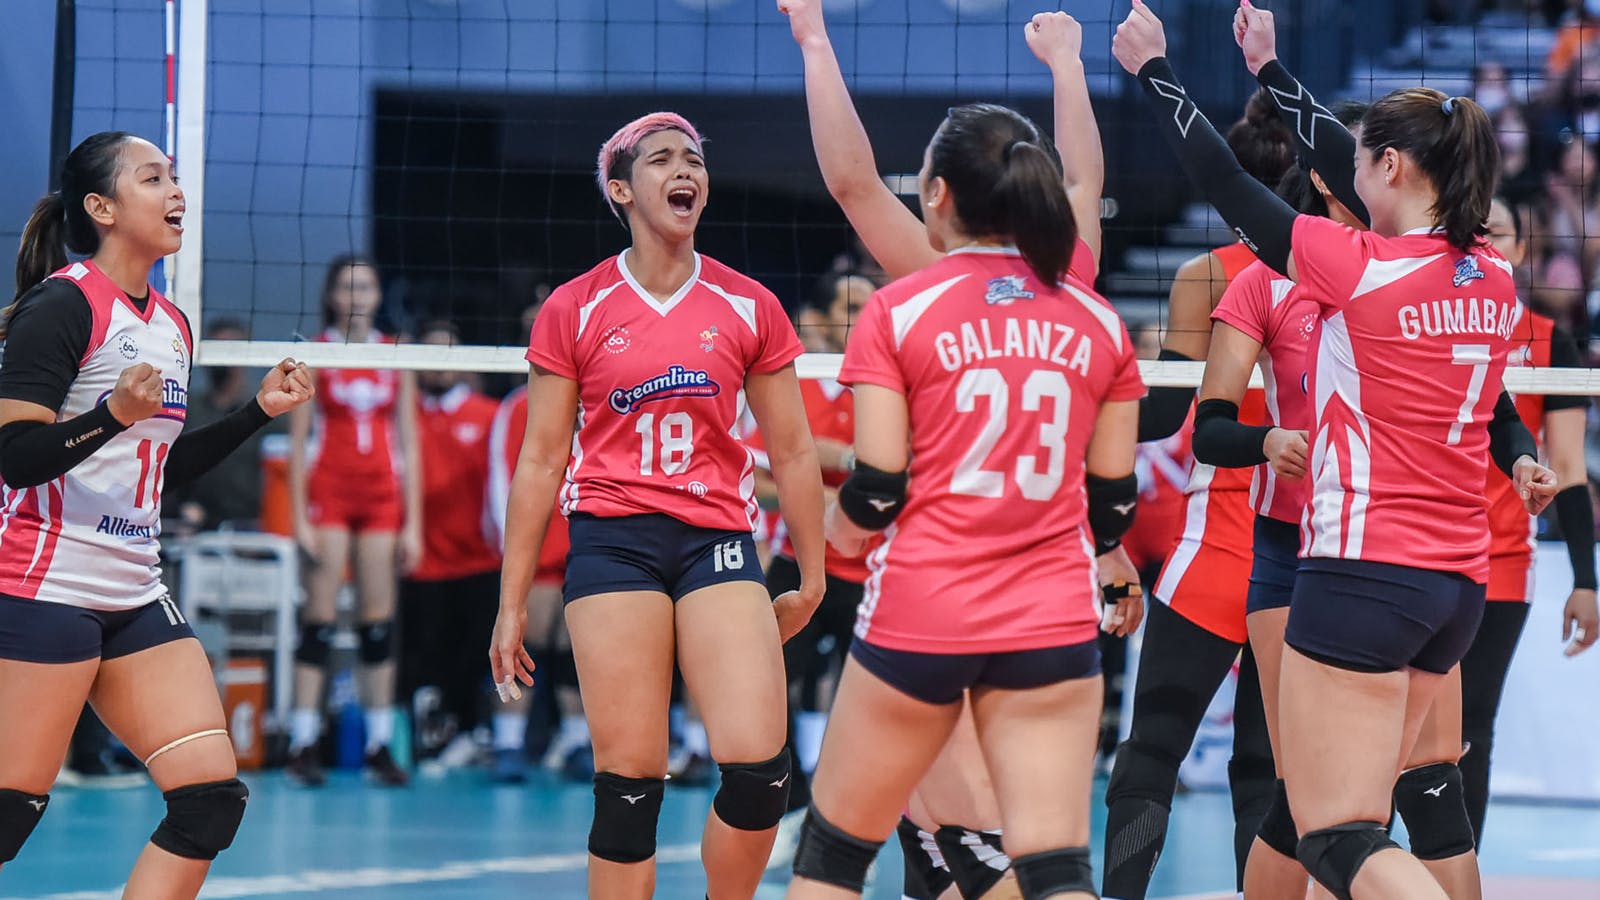 Back-to-back All-Filipino champs Creamline has sights set on more gold, this time for the country